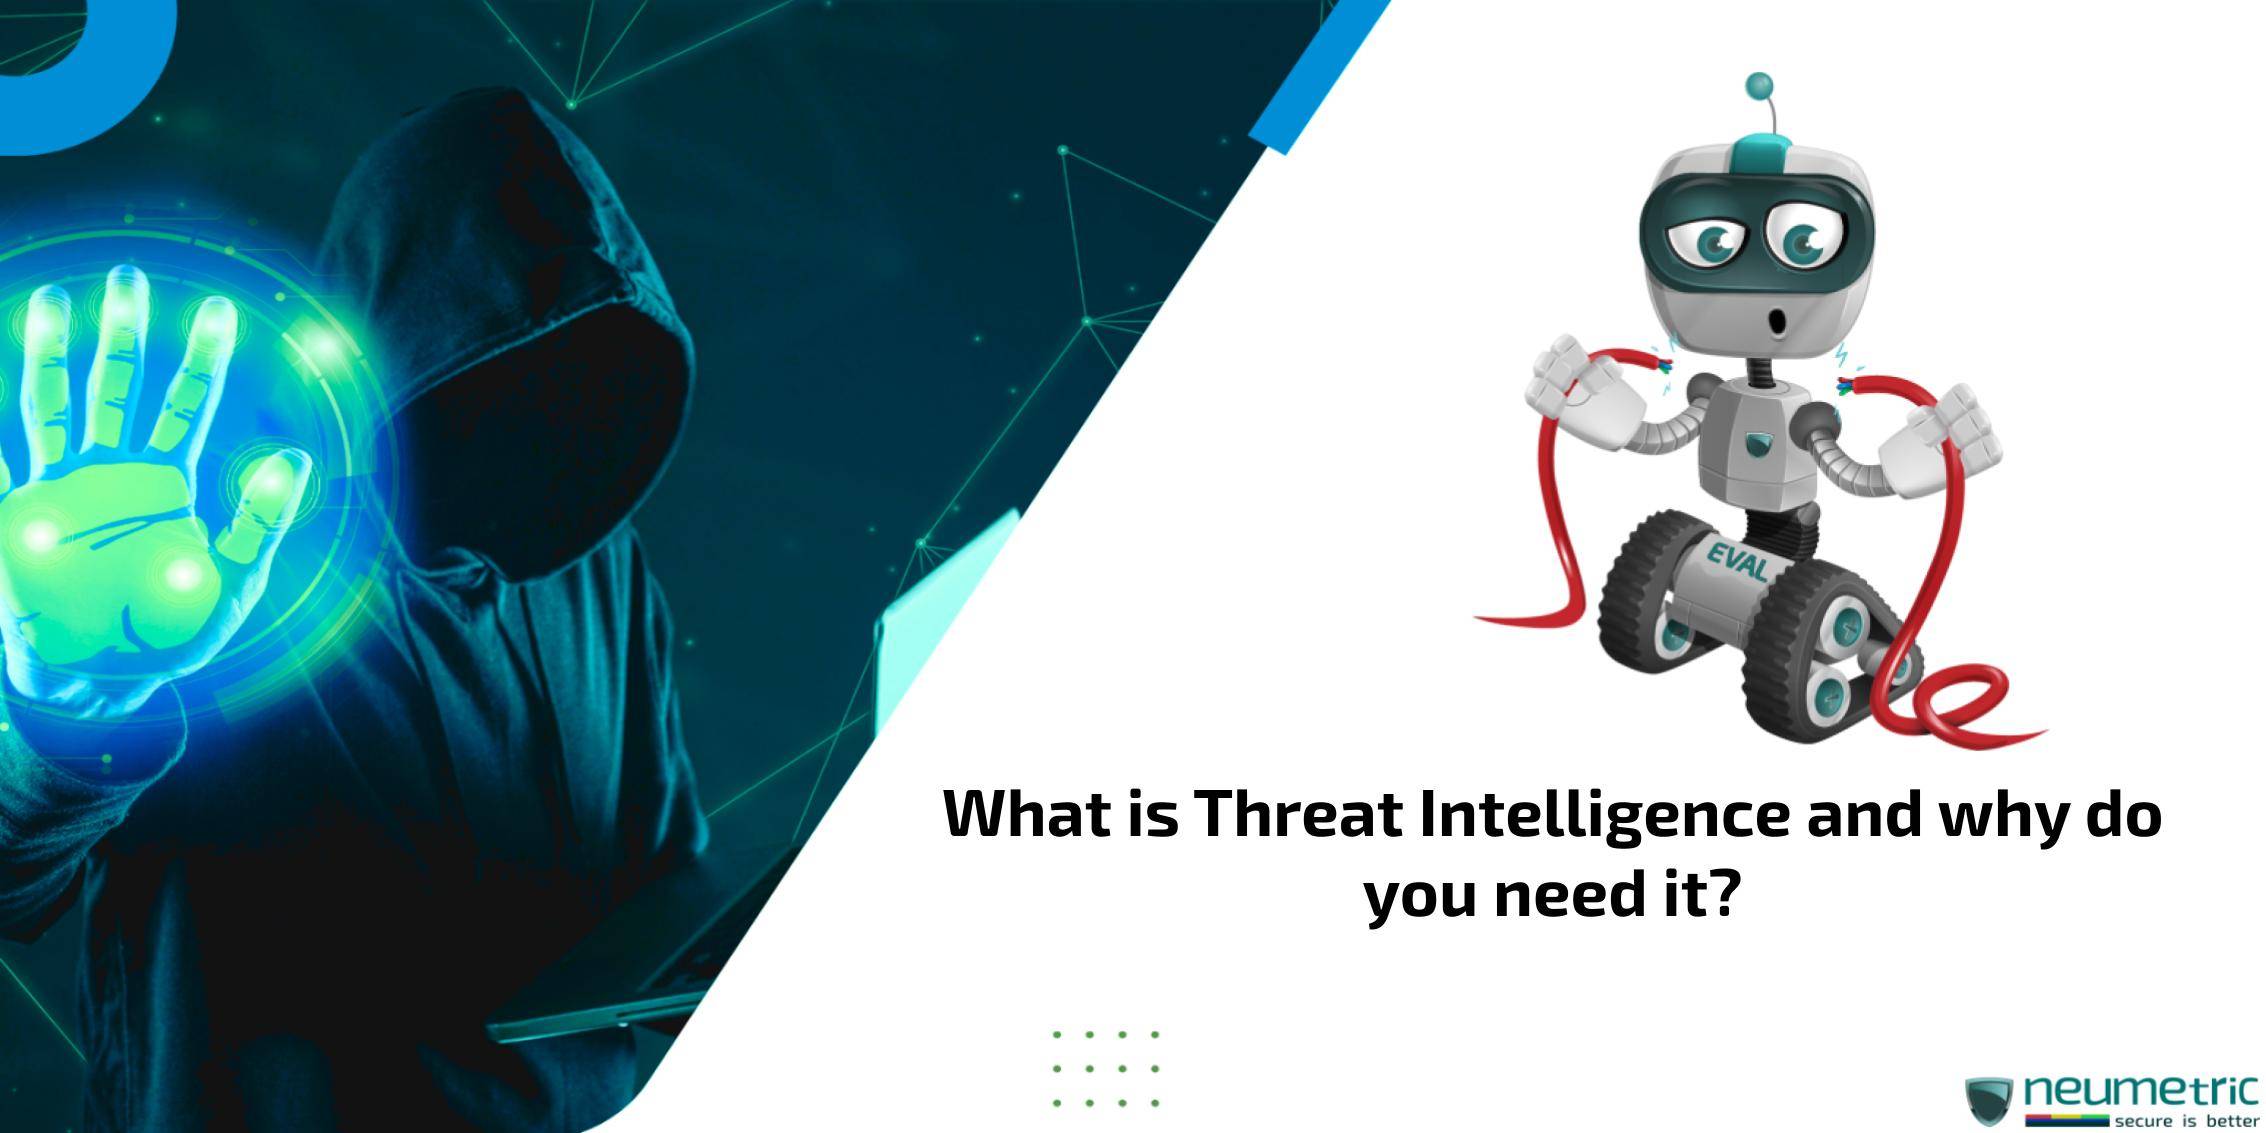 What is Threat Intelligence and why do you need it?